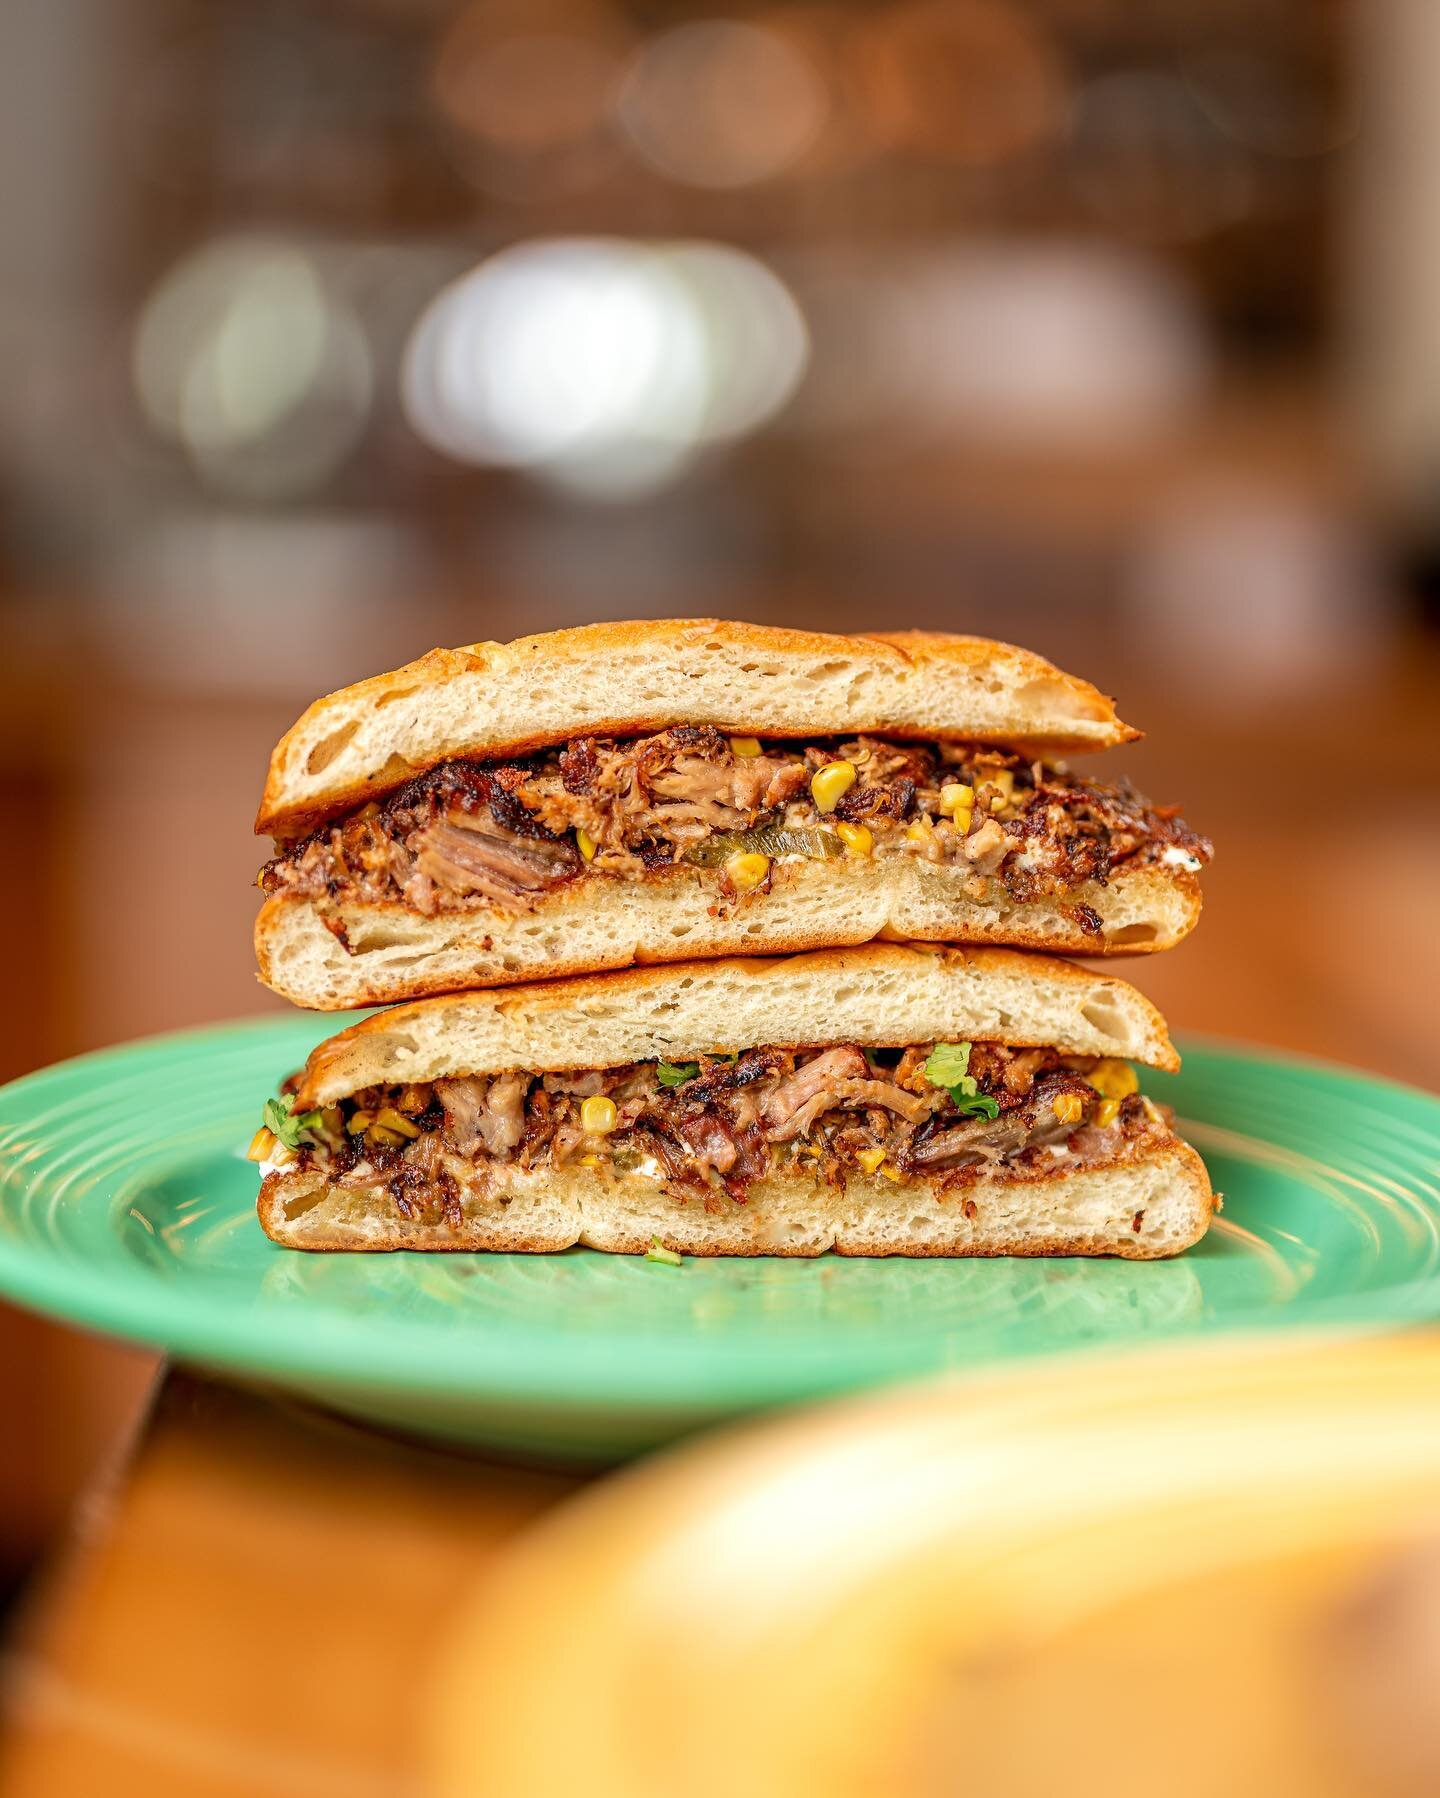 Taco Tuesday or Torta Tuesday? There&rsquo;s no wrong answer.

Pictured: Pork Torta
Carnitas/ Queso Crema / Smoked Jalape&ntilde;os / Grilled Corn / Cilantro / @thehawthornbakery Telera Bread